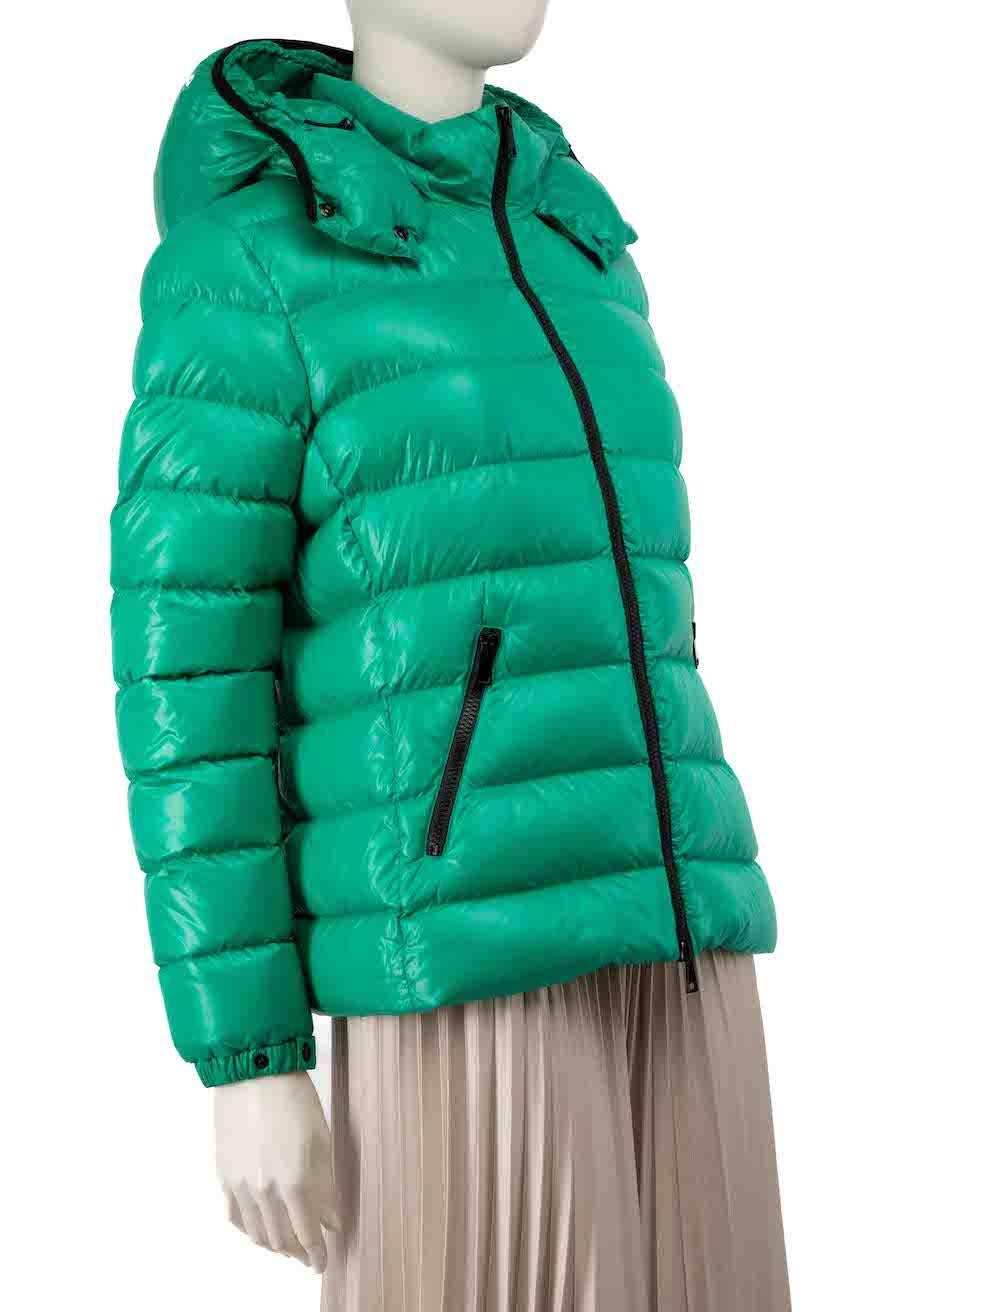 CONDITION is Very good. Minimal wear to jacket is evident. Minimal marks to hood and front on this used Moncler designer resale item.
 
 
 
 Details
 
 
 Bady model
 
 Green
 
 Synthetic
 
 Puffer down jacket
 
 Mid length
 
 Front double zip